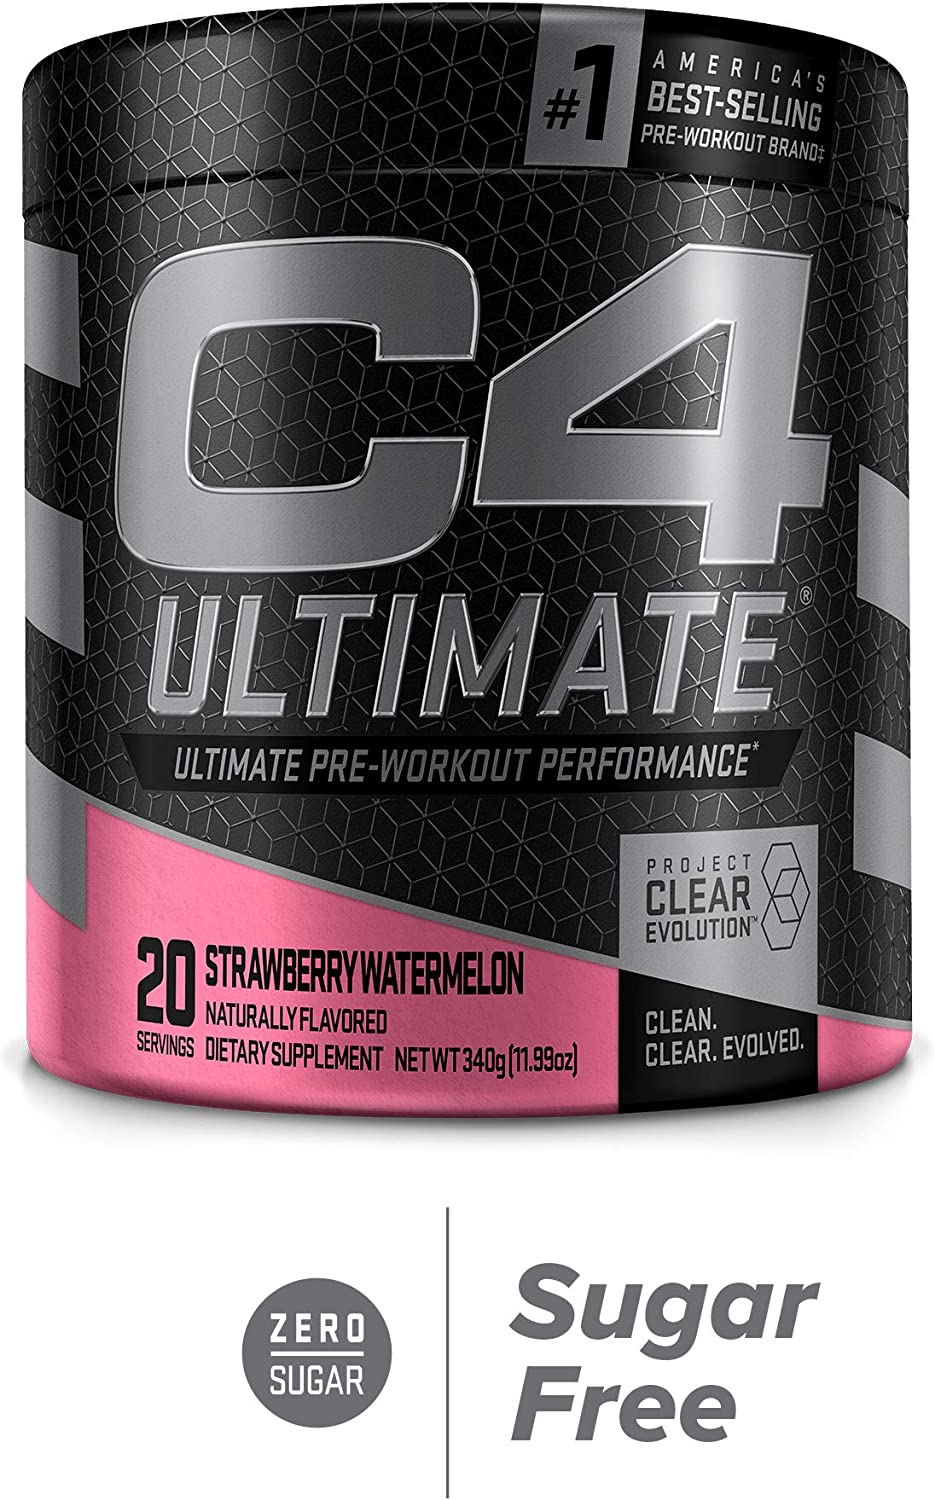 C4 Ultimate Workout Performance Strawberry Watermelon, 20 Servings